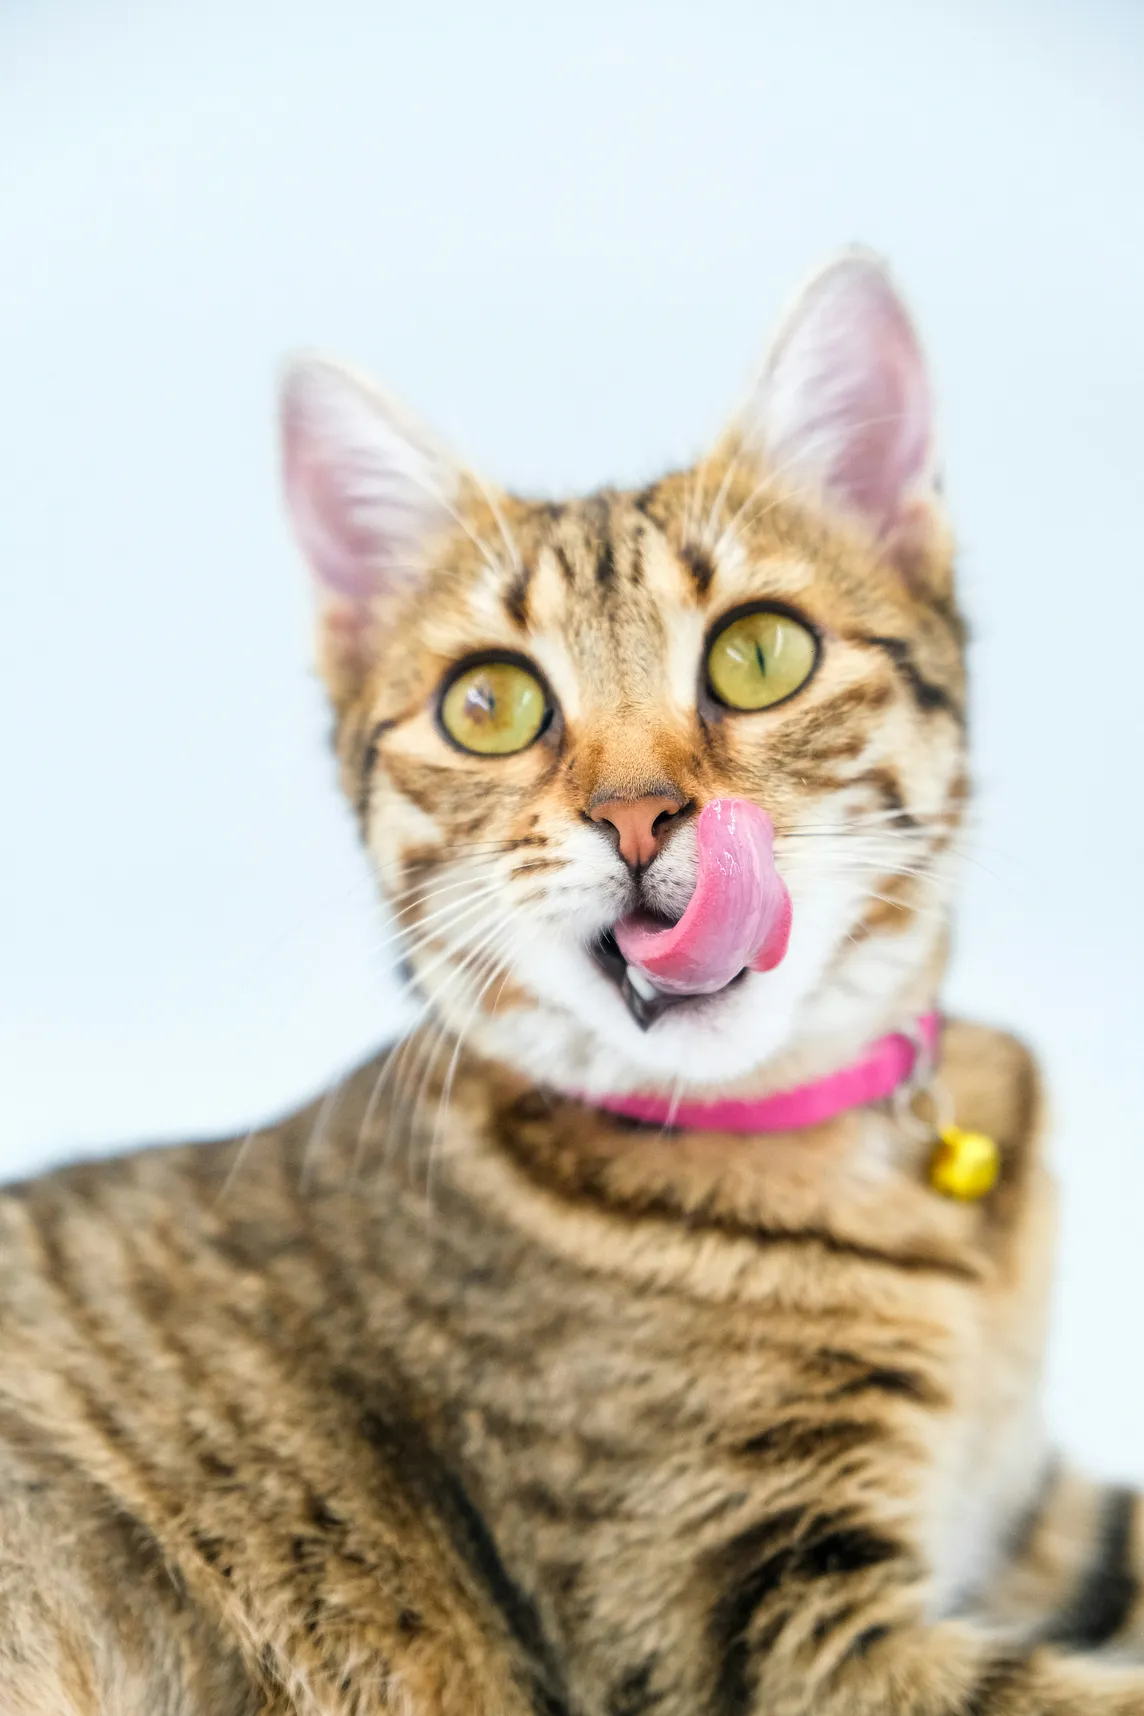 Photo of a yellow tabby cat with green eyes and her tongue stuck out